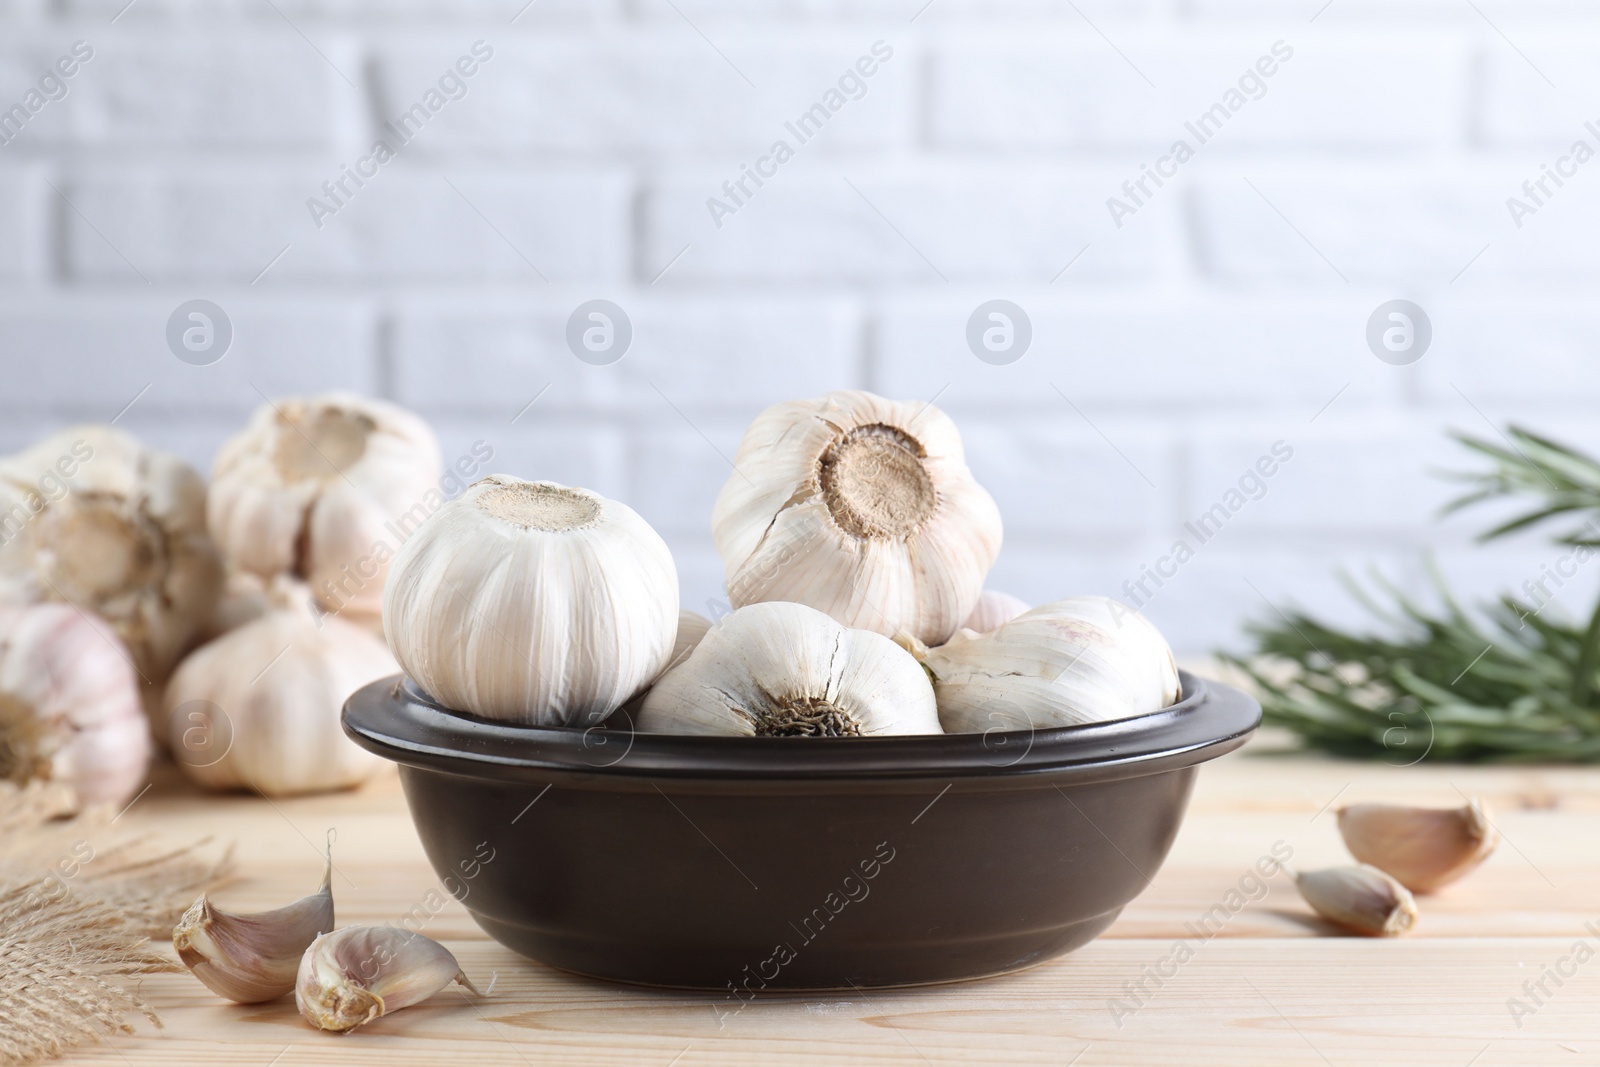 Photo of Bulbs and cloves of fresh garlic on wooden table